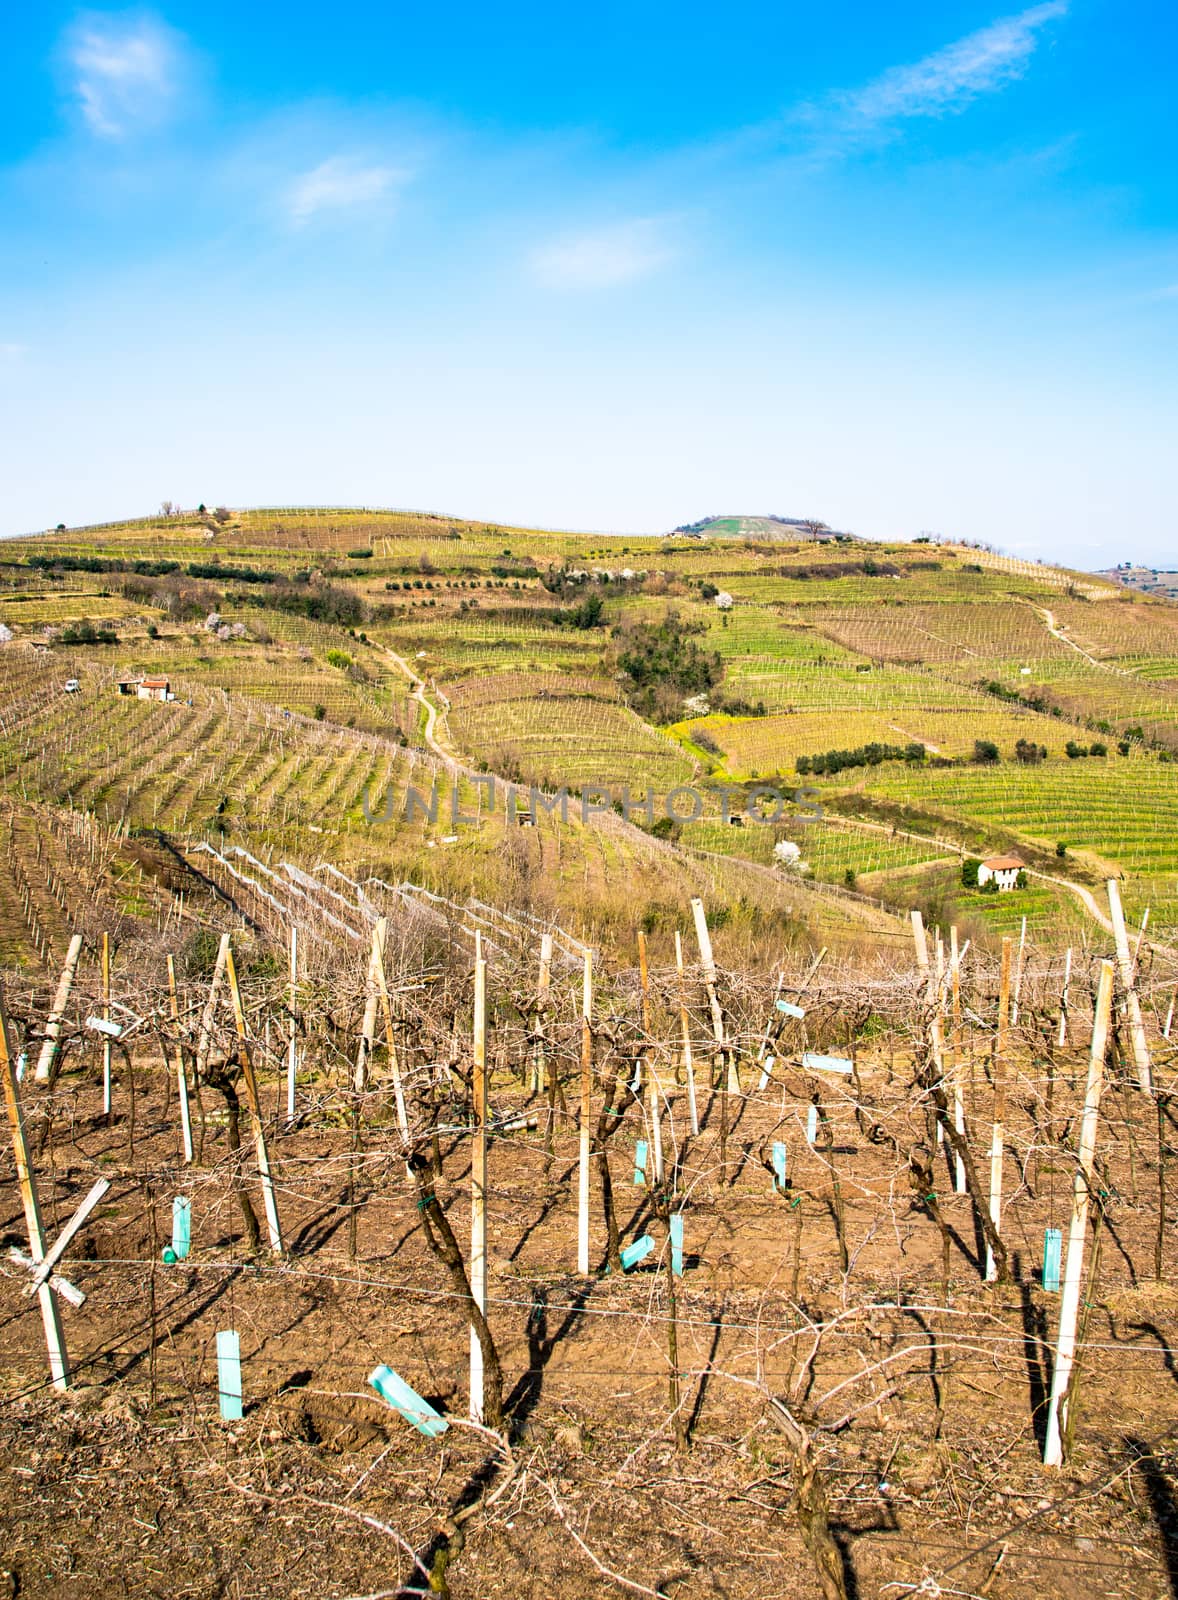 vineyards on the hills in spring, Italy by Isaac74